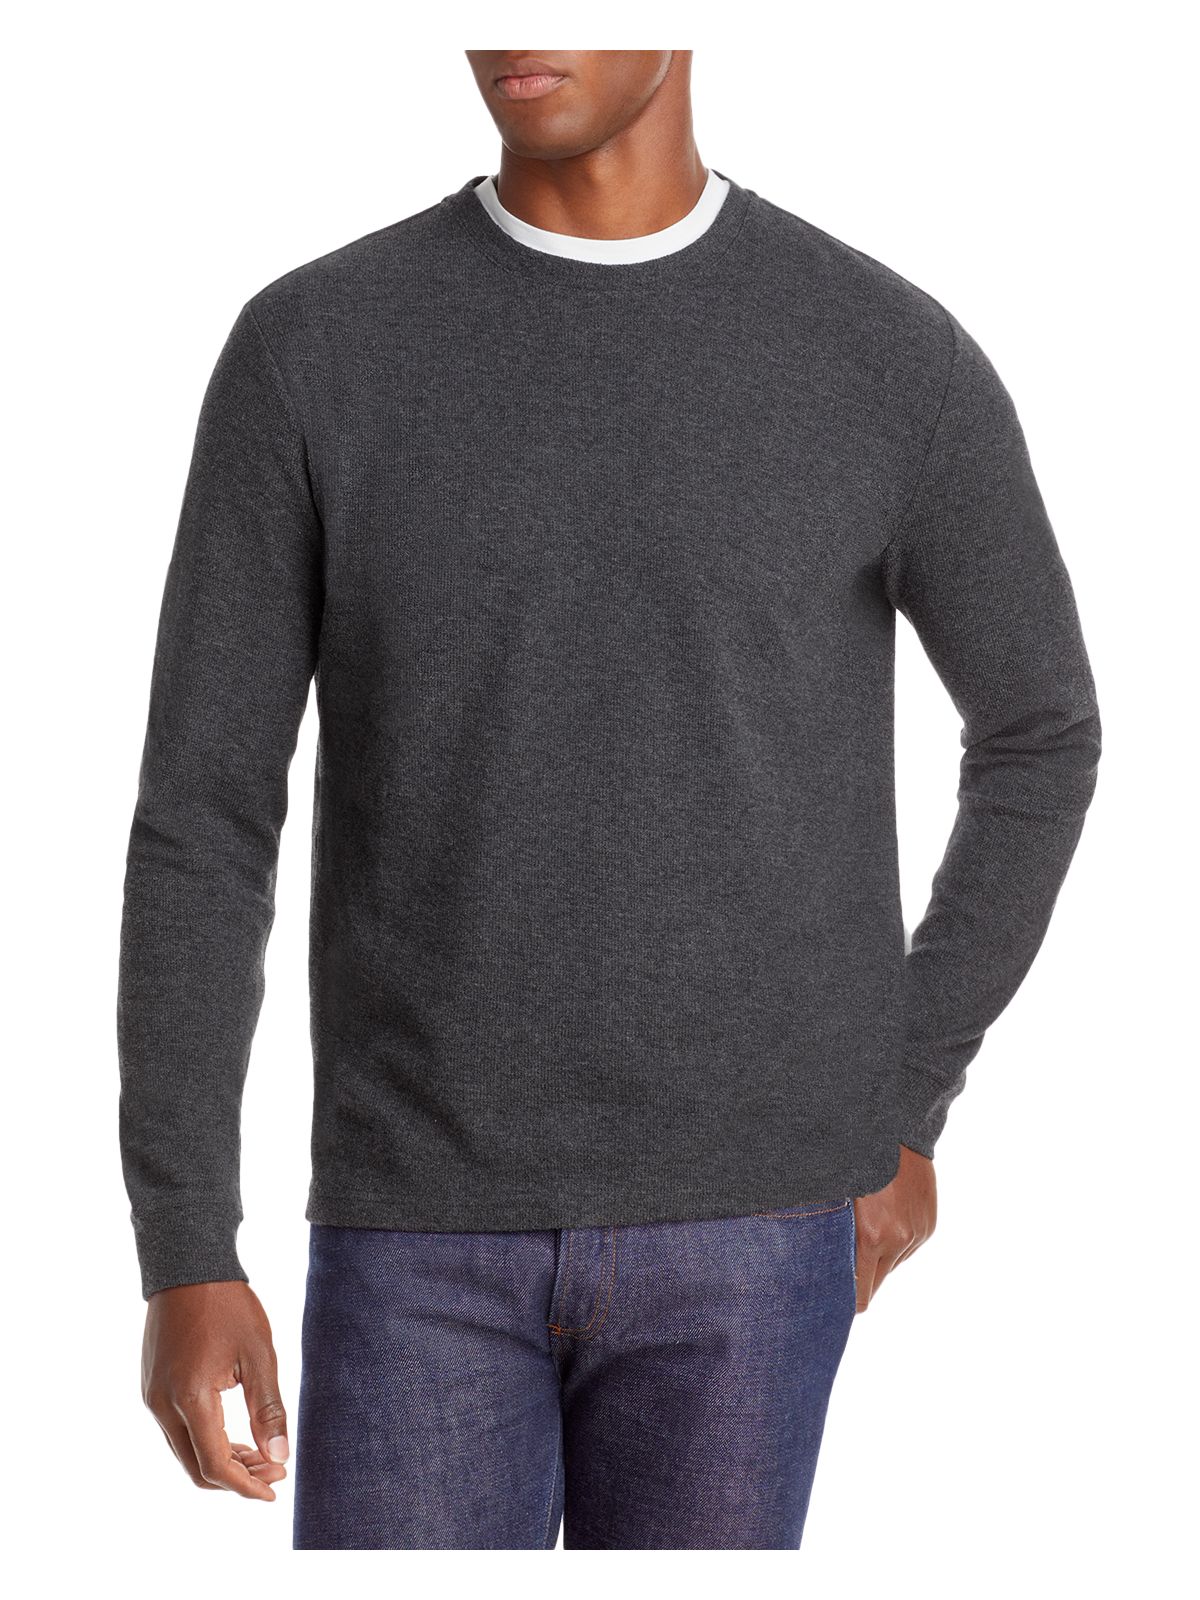 THE MENS STORE Mens Gray Heather Long Sleeve Crew Neck Classic Fit Cotton Pullover Sweater L